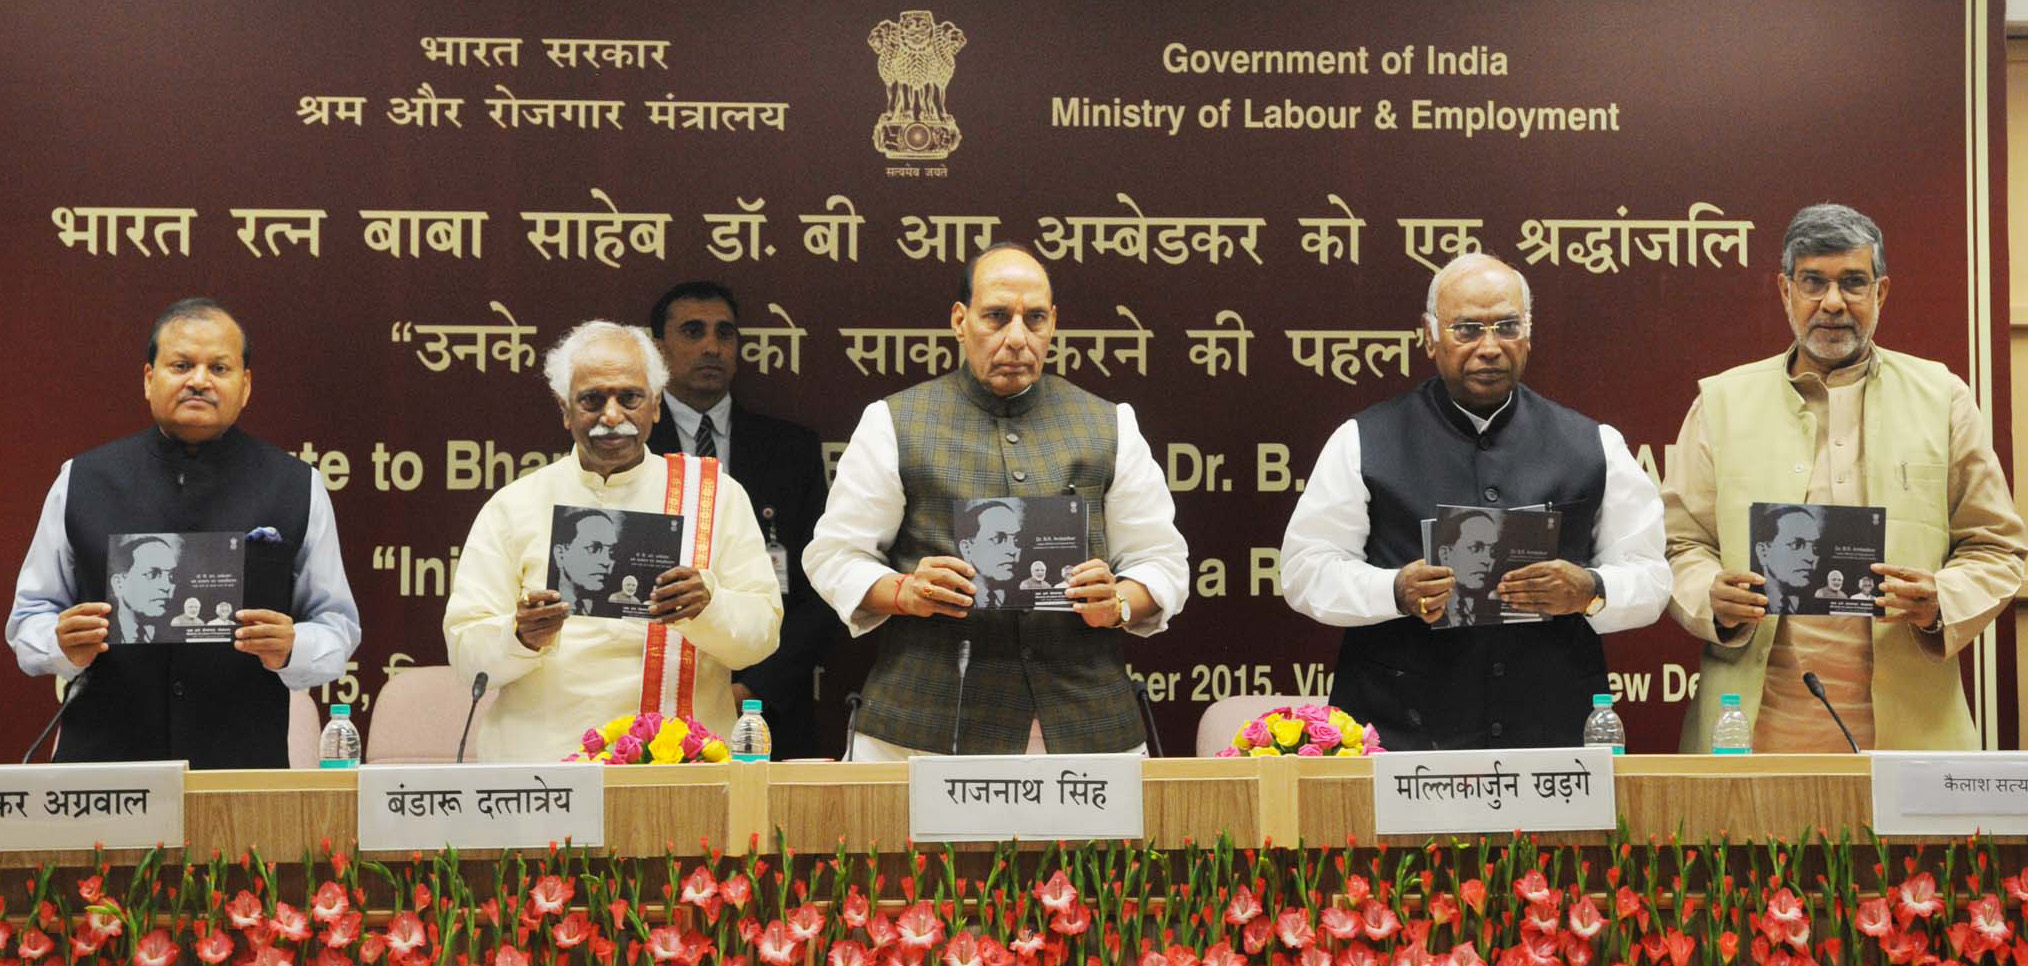 The Union Home Minister, Shri Rajnath Singh releasing a booklet on Dr. B.R. Ambedkar to commemorate his 125th Birth Anniversary, in New Delhi on December 06, 2015. 	The Minister of State for Labour and Employment (Independent Charge), Shri Bandaru Dattatreya, the Secretary, Ministry of Labour and Employment, Shri Shankar Aggarwal and other dignitaries also seen.